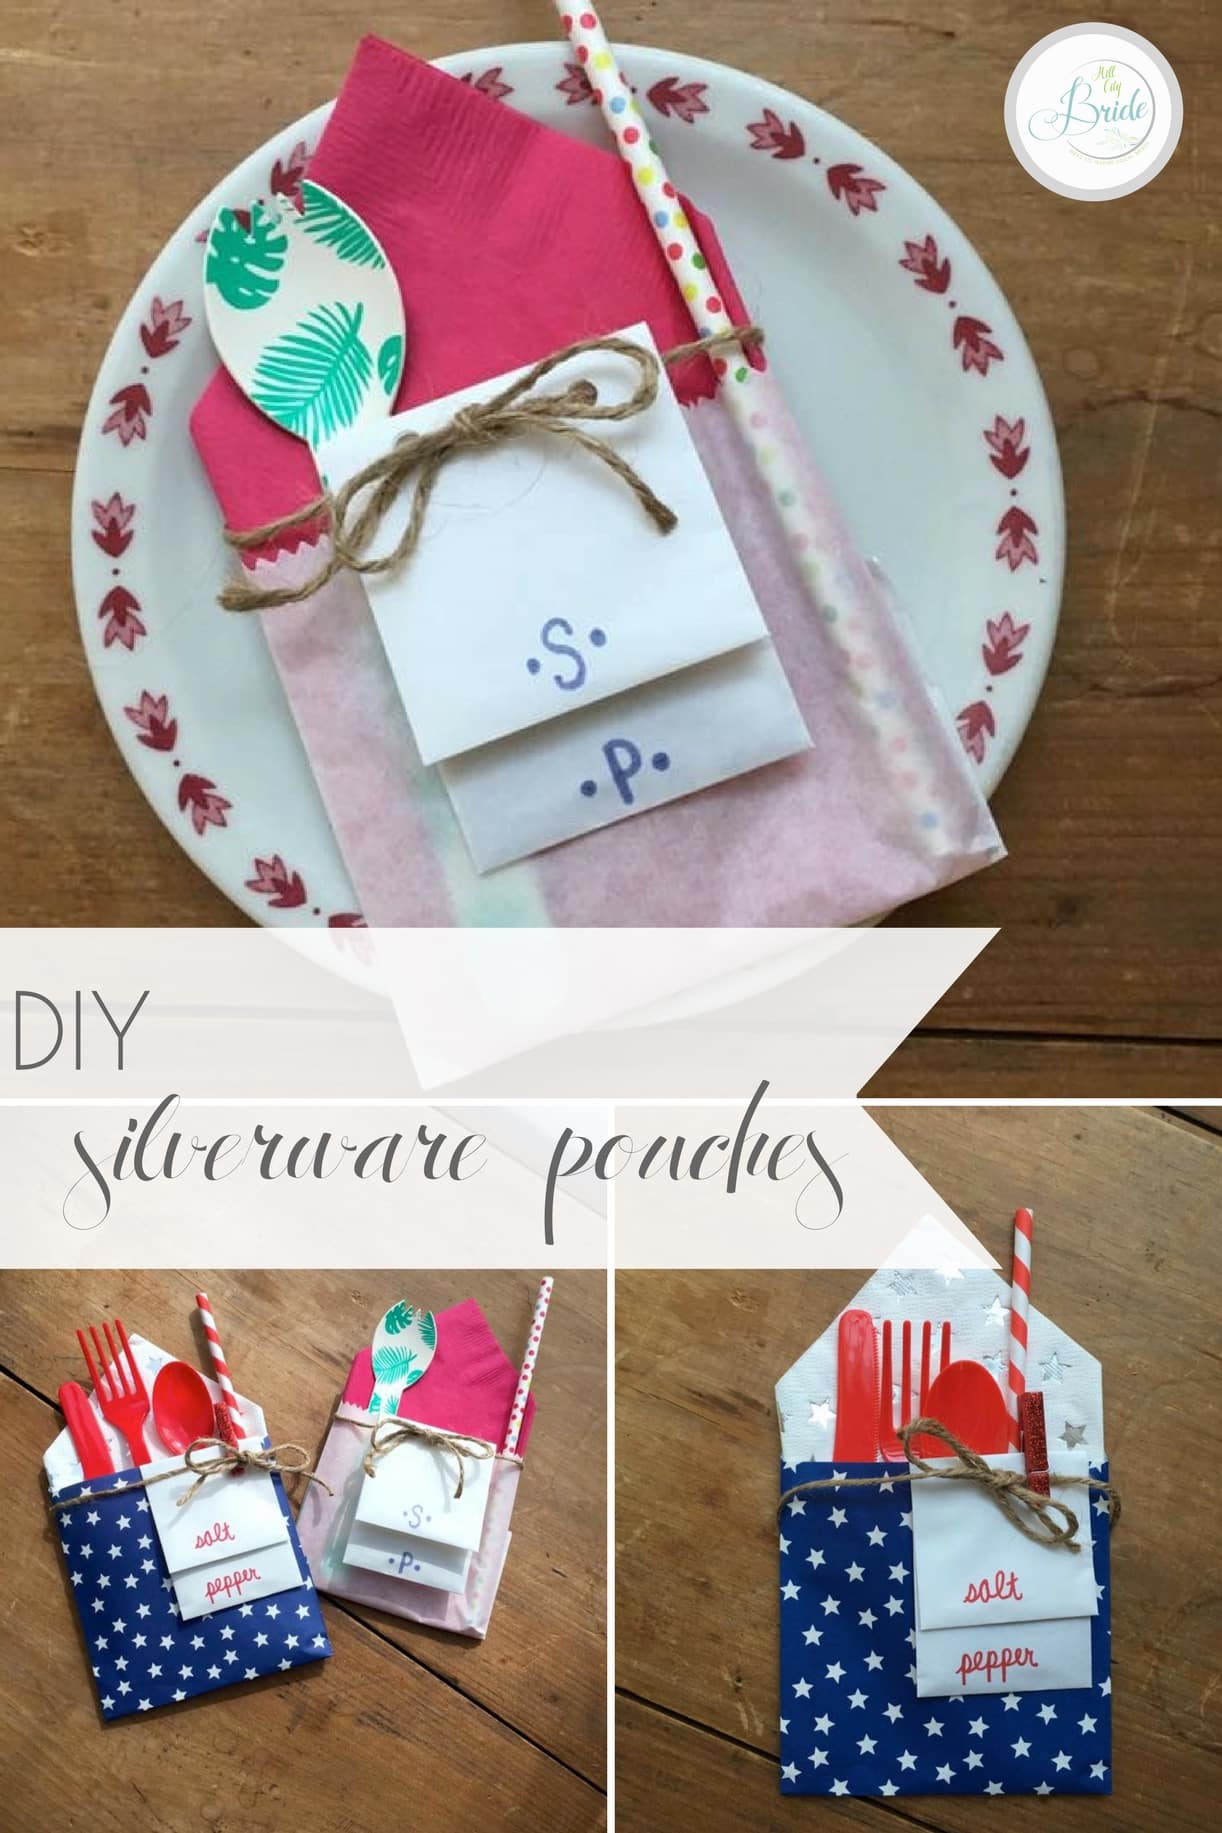 Custom DIY Silverware Pouches as seen on Hill City Bride Wedding Blog for Events and Parties